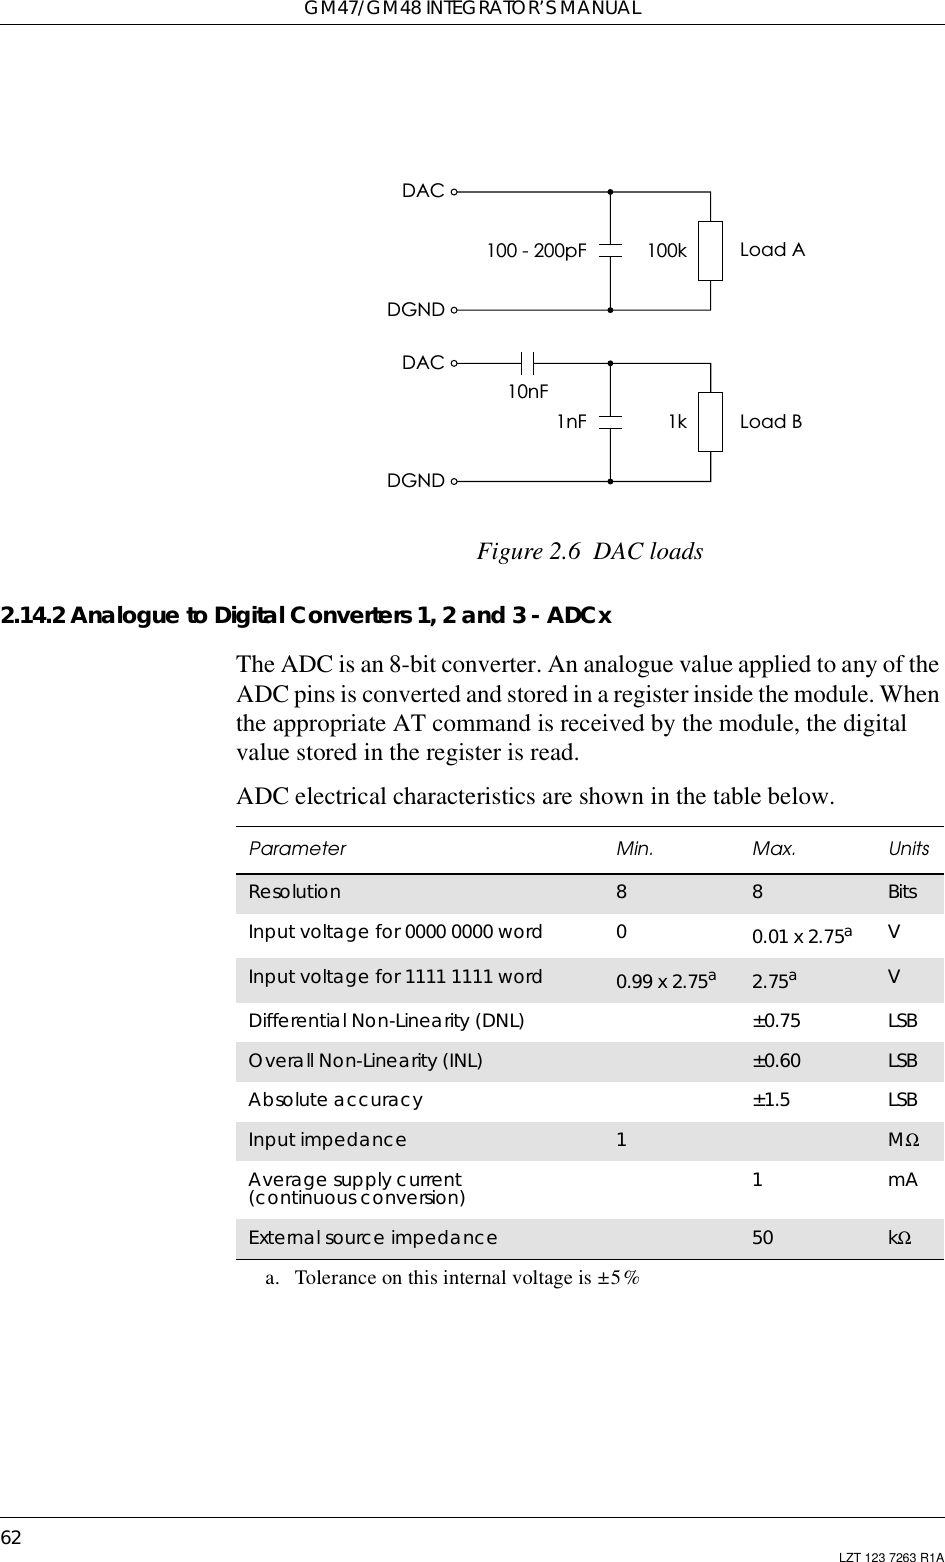 GM47/GM48 INTEGRATOR’S MANUAL62 LZT 123 7263 R1AFigure 2.6 DAC loads2.14.2 Analogue to Digital Converters 1, 2 and 3 - ADCxThe ADC is an 8-bit converter. An analogue value applied to any of theADC pins is converted and stored in a register inside the module. Whenthe appropriate AT command is received by the module, the digitalvalue stored in the register is read.ADC electrical characteristics are shown in the table below.1kDGNDDAC1nF10nFLoad B100kDGNDDAC100 - 200pF Load AParameter Min. Max. UnitsResolution 88BitsInput voltage for 0000 0000 word 00.01 x 2.75aa. Tolerance on this internal voltage is ±5%VInput voltage for 1111 1111 word 0.99 x 2.75a2.75aVDifferential Non-Linearity (DNL) ±0.75 LSBOverall Non-Linearity (INL) ±0.60 LSBAbsolute accuracy ±1.5 LSBInput impedance 1 MΩAverage supply current(continuous conversion) 1mAExternal source impedance 50 kΩ